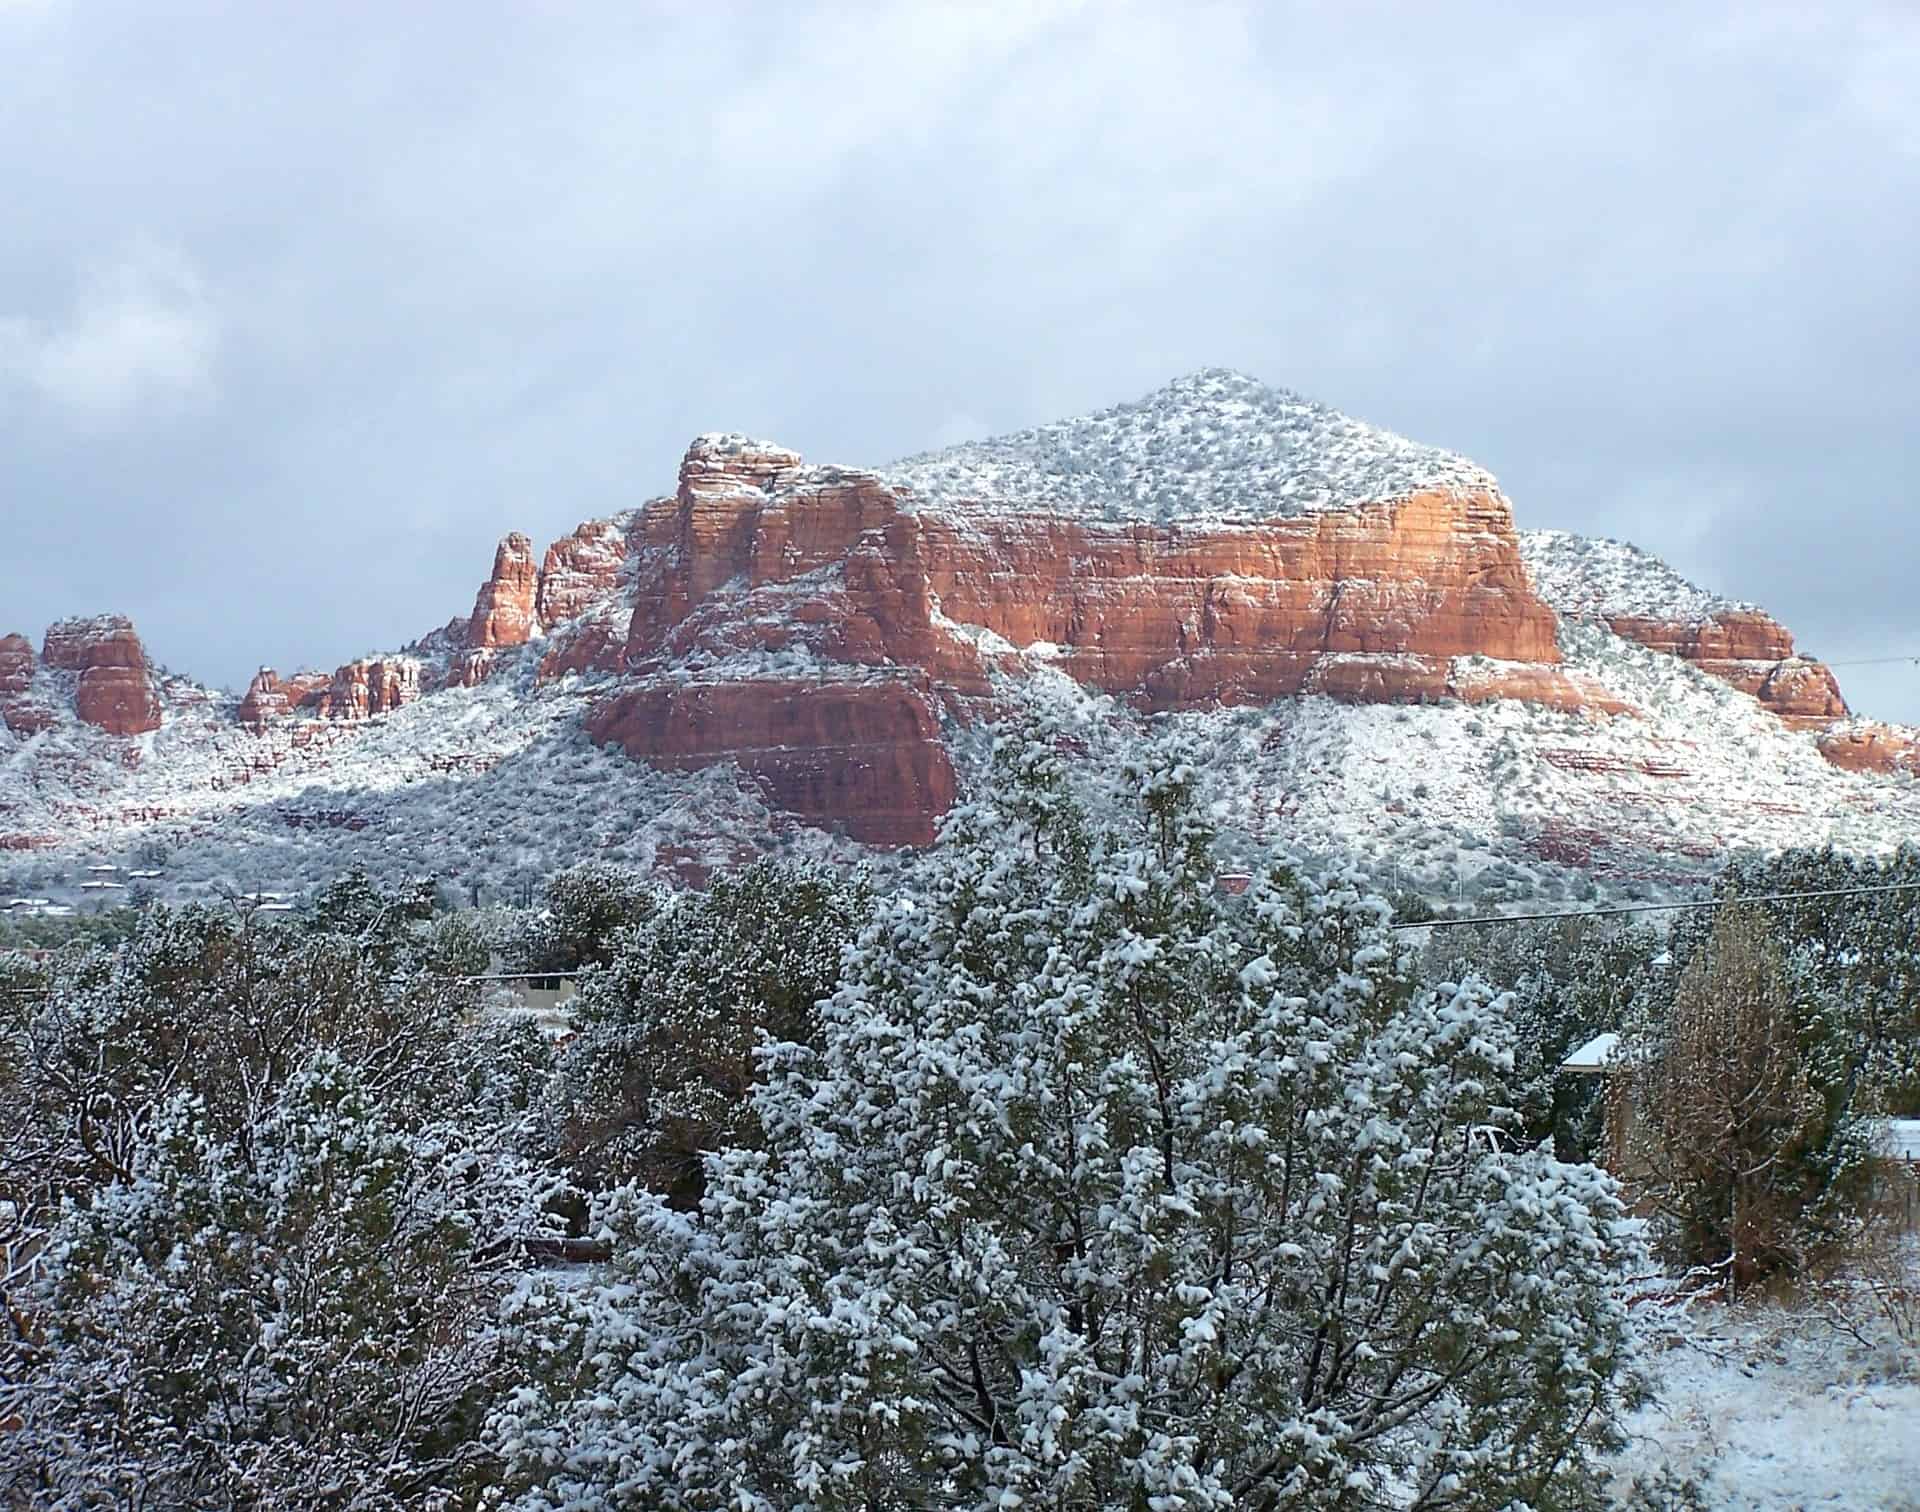 Best things to do in Sedona Arizona - Leisa Peterson - Sedona red rocks with winter snow by Kate McGahan on Pixabay 49099